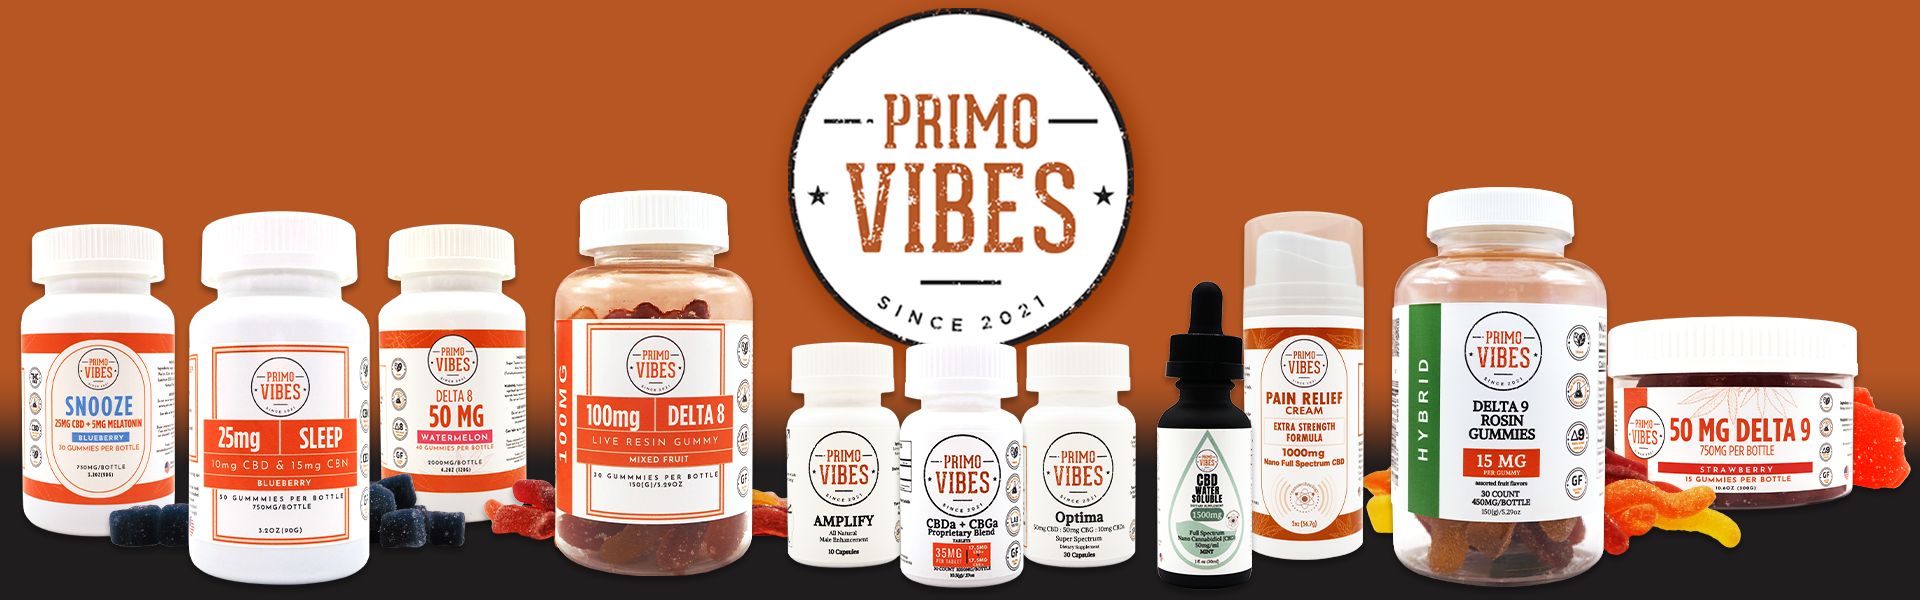 Primo Vibes Home Page Banner